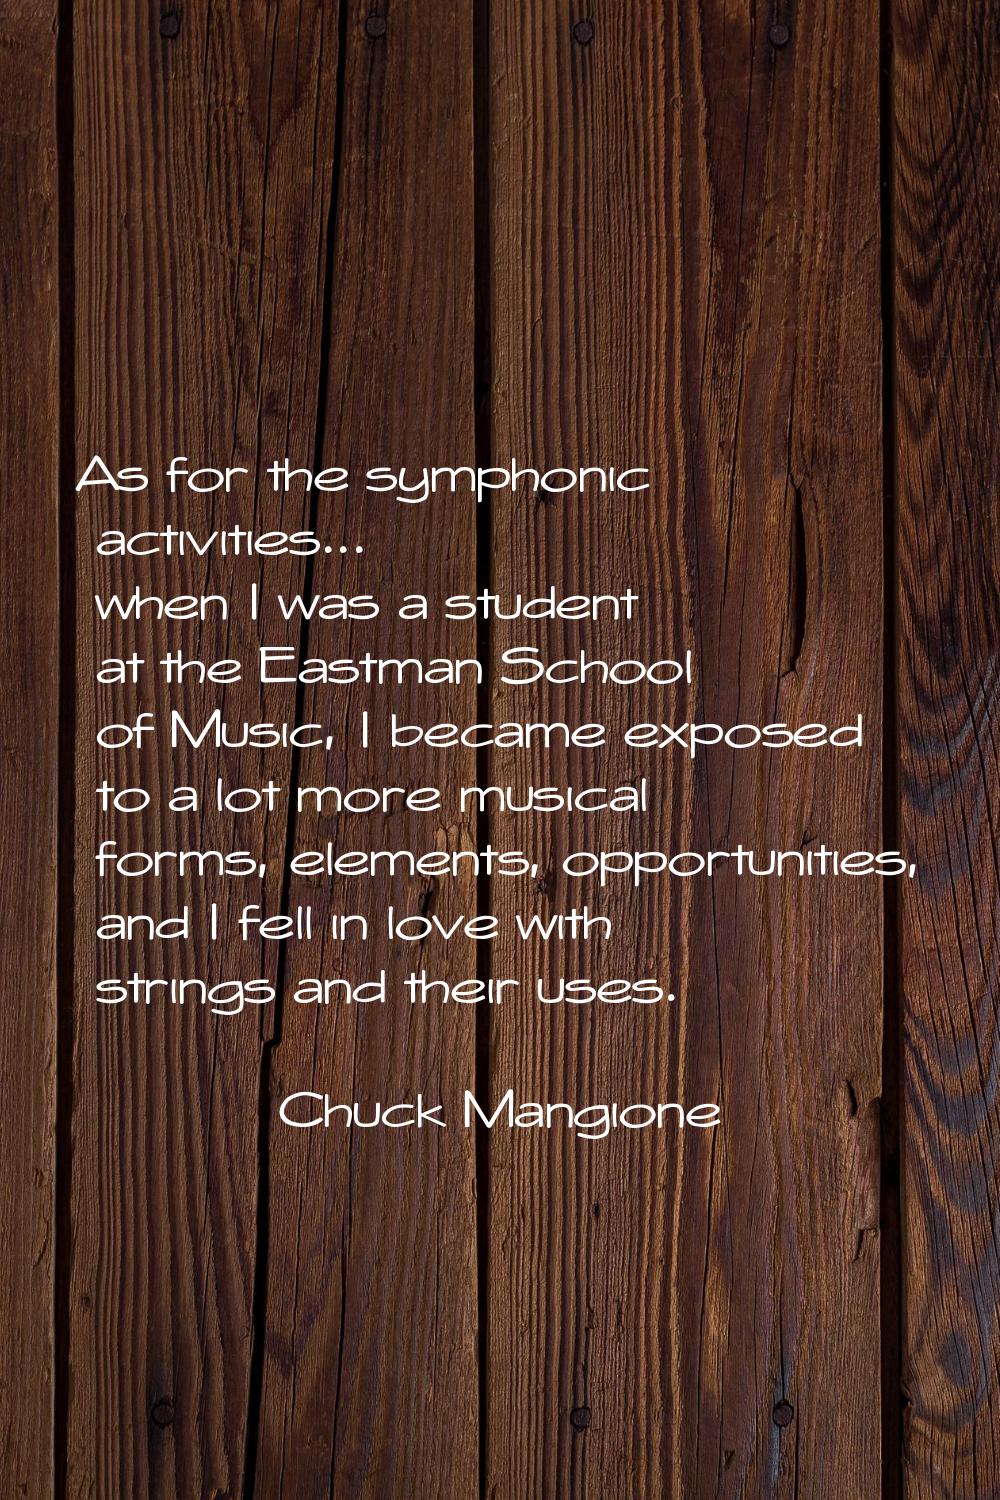 As for the symphonic activities... when I was a student at the Eastman School of Music, I became ex